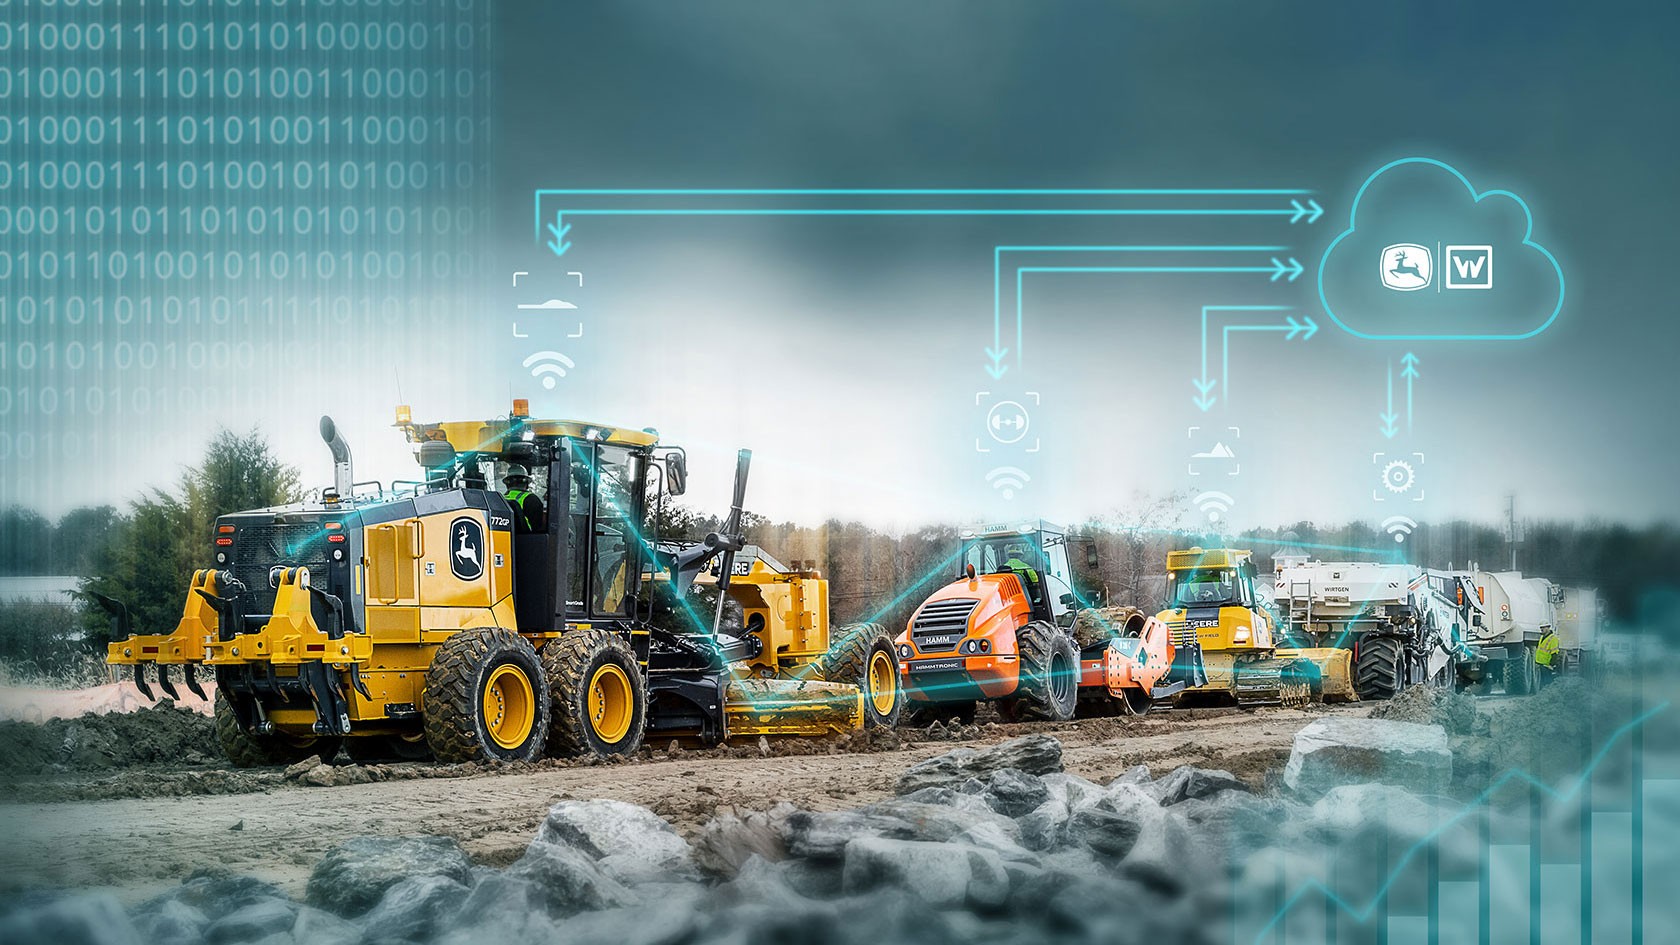 Wirtgen Group and John Deere machines, all visually connected in a single app